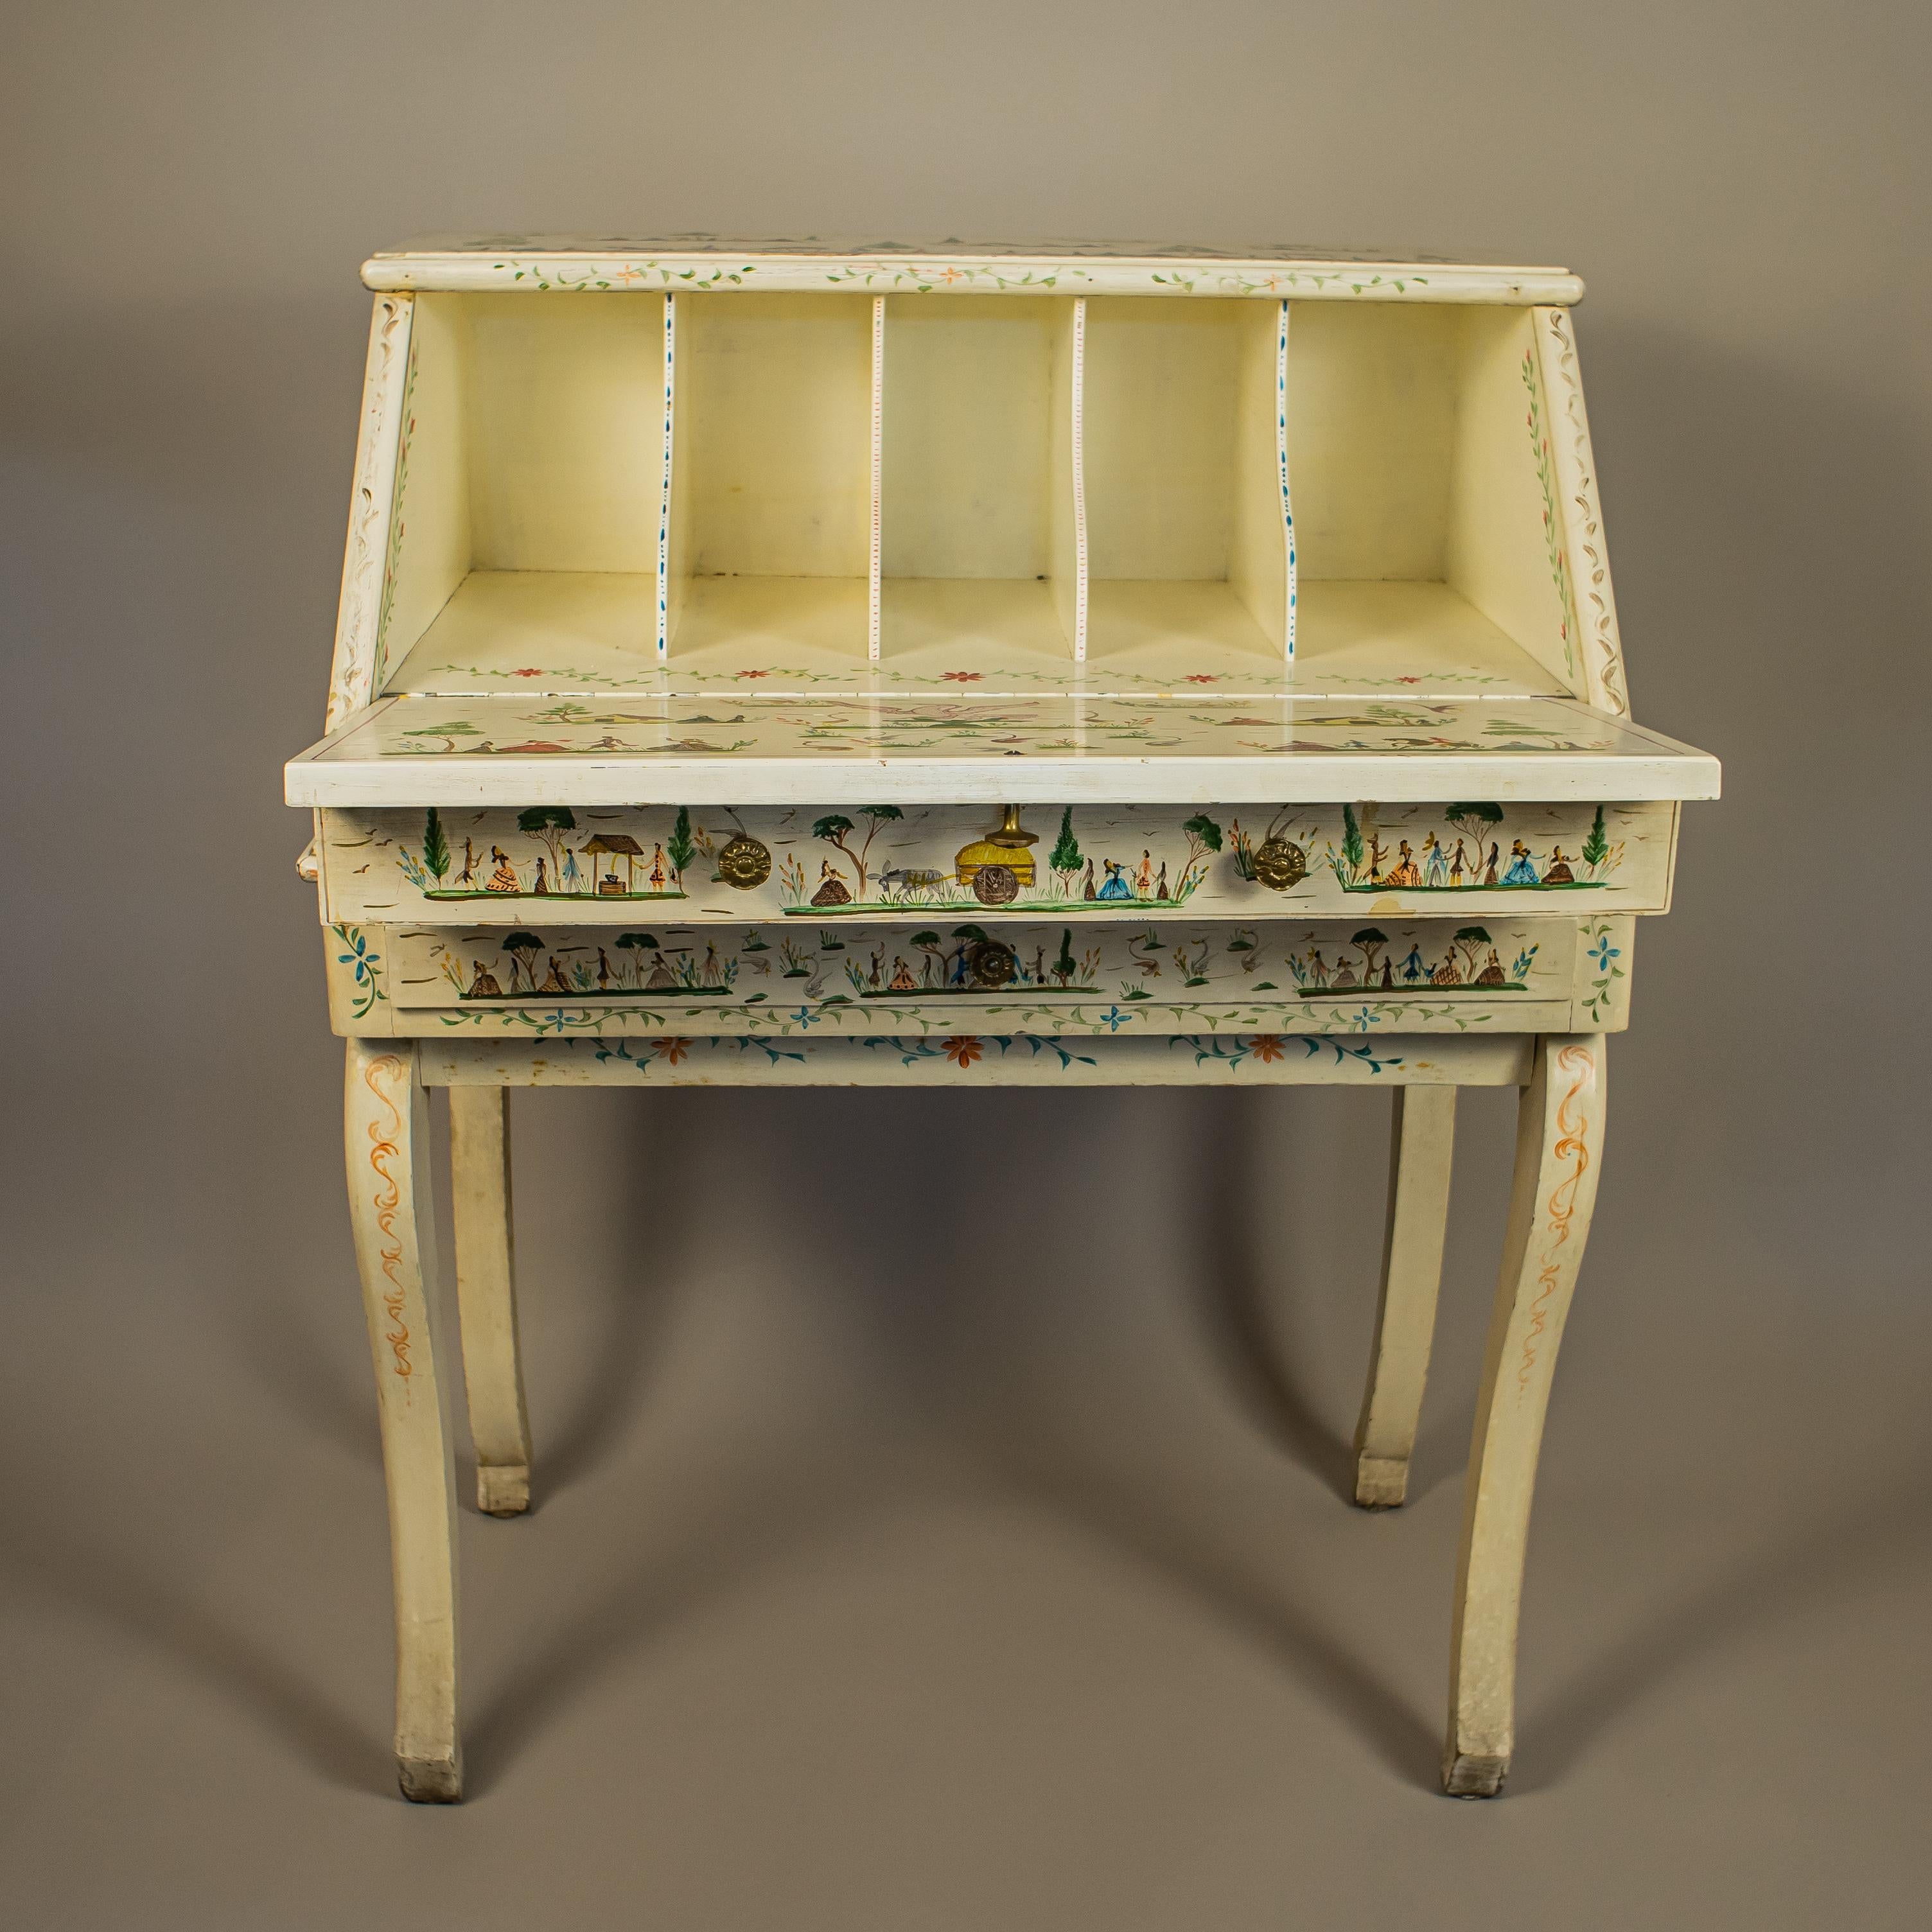 A 1940's Mexican set of secretaire with chair and tray by Mexican folk art artist Benito Fosado. The Louis XV style furniture is lacquered in white and decorated with animals, flowers, vegetal elements gallant scenes of French inspiration. The